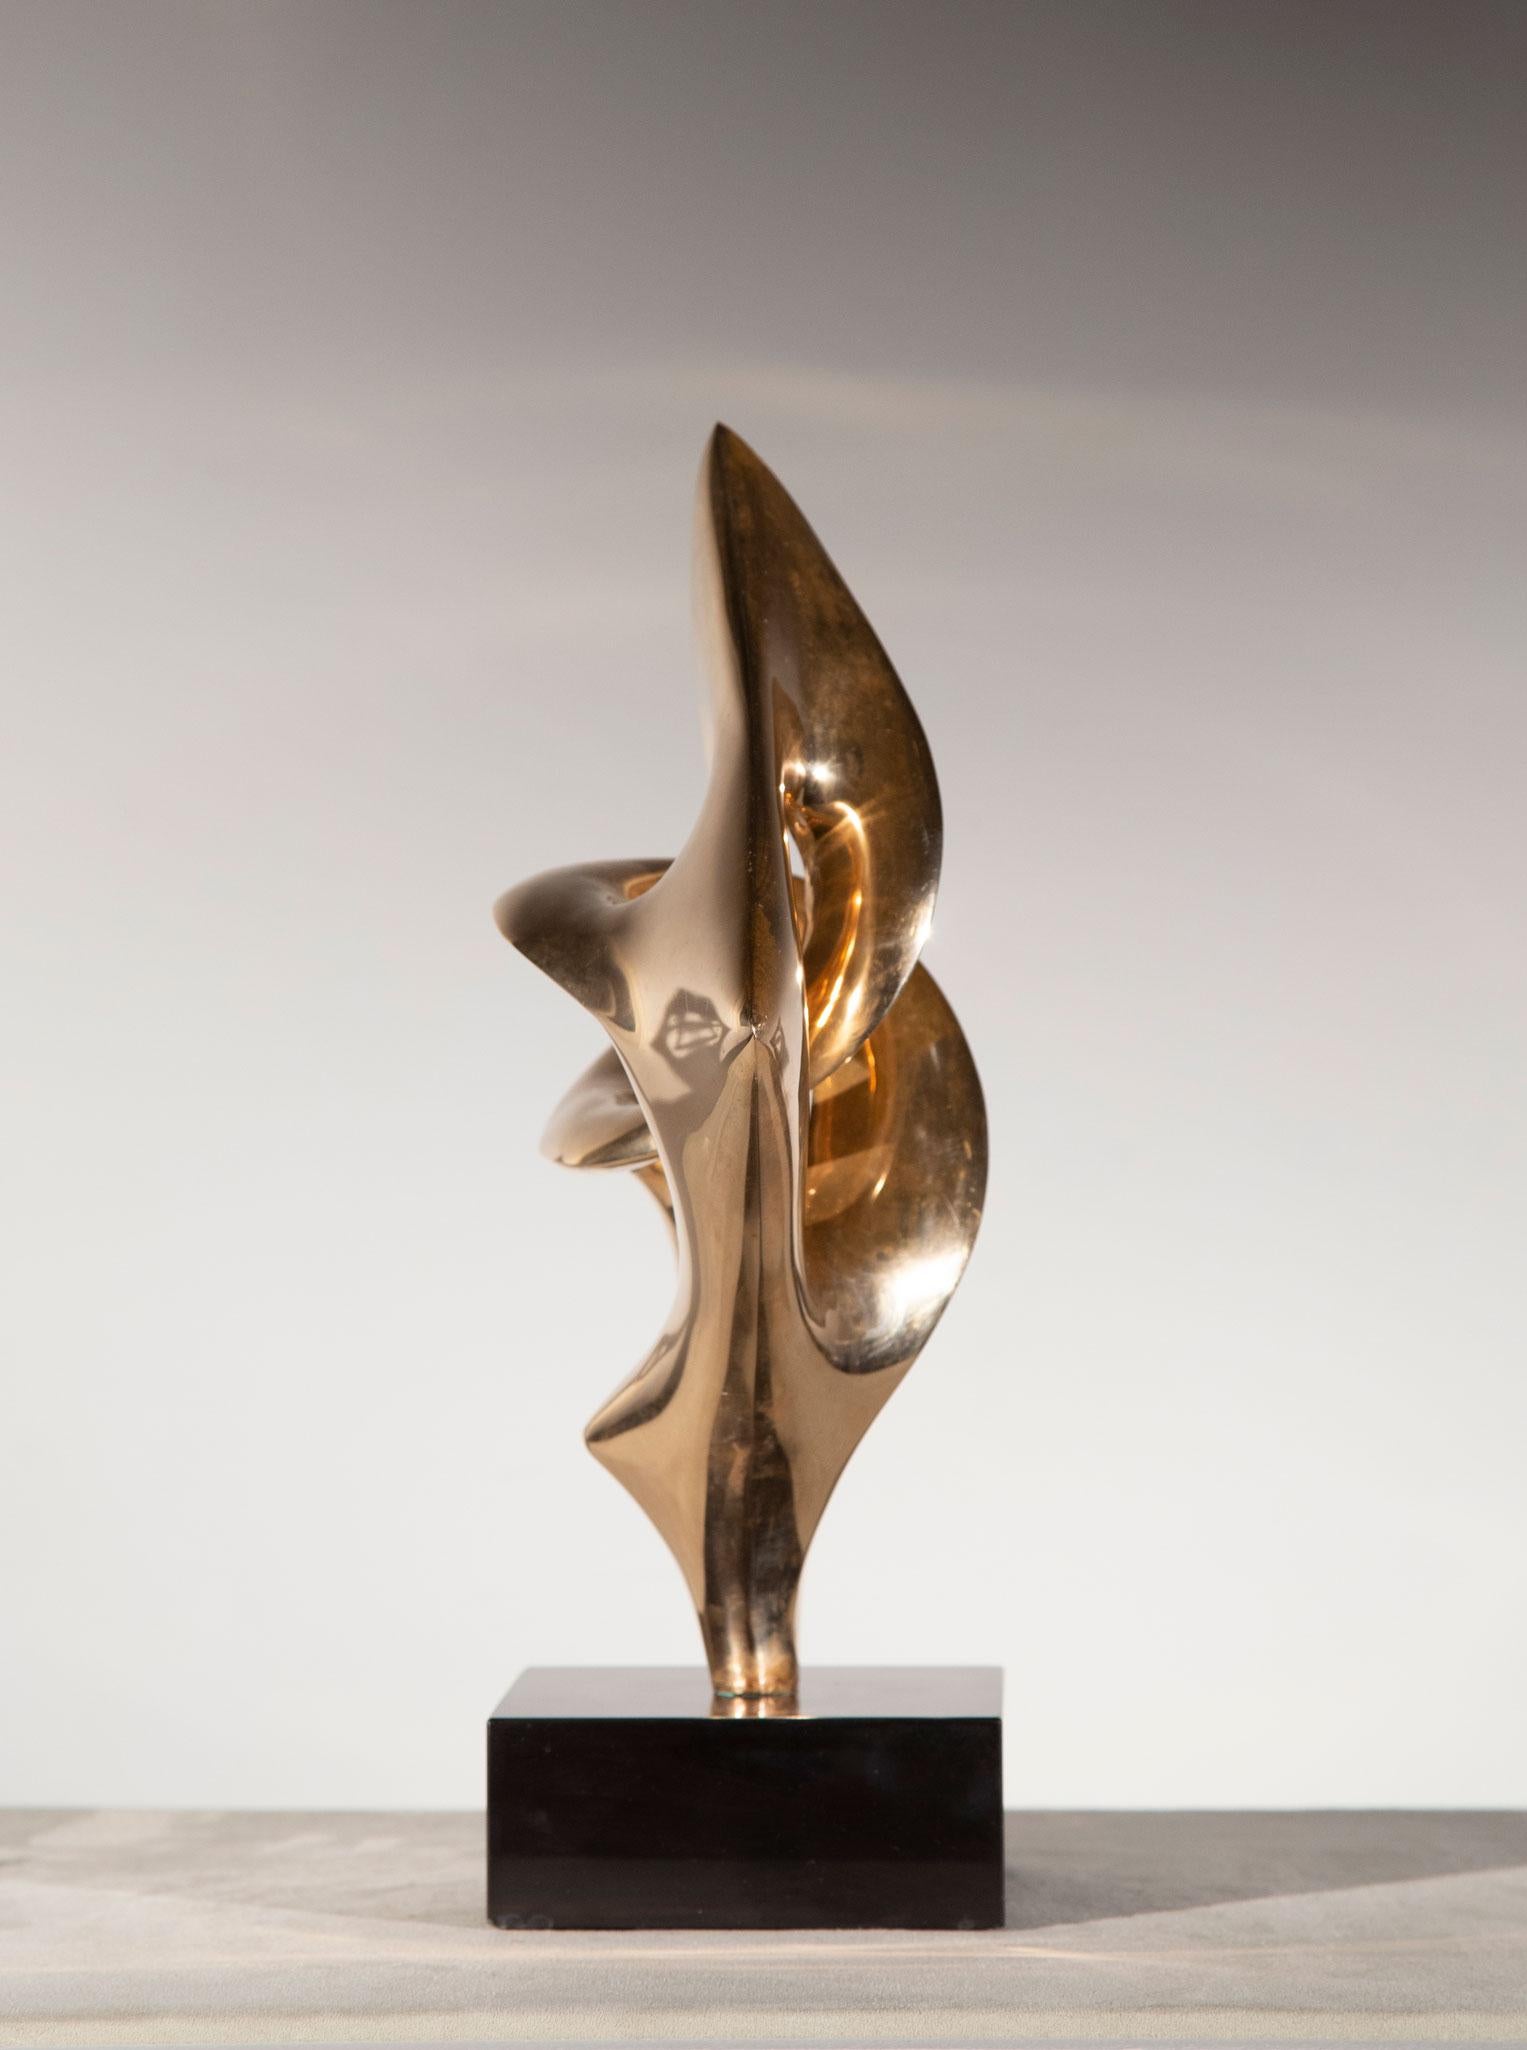  Kieff’s elegant polished bronze examines the play between positive and negative space to effect a diamond-shaped composition. The Fado in its title references a genre of music that originated in Lisbon, Portugal in the 1820s. Kieff derives